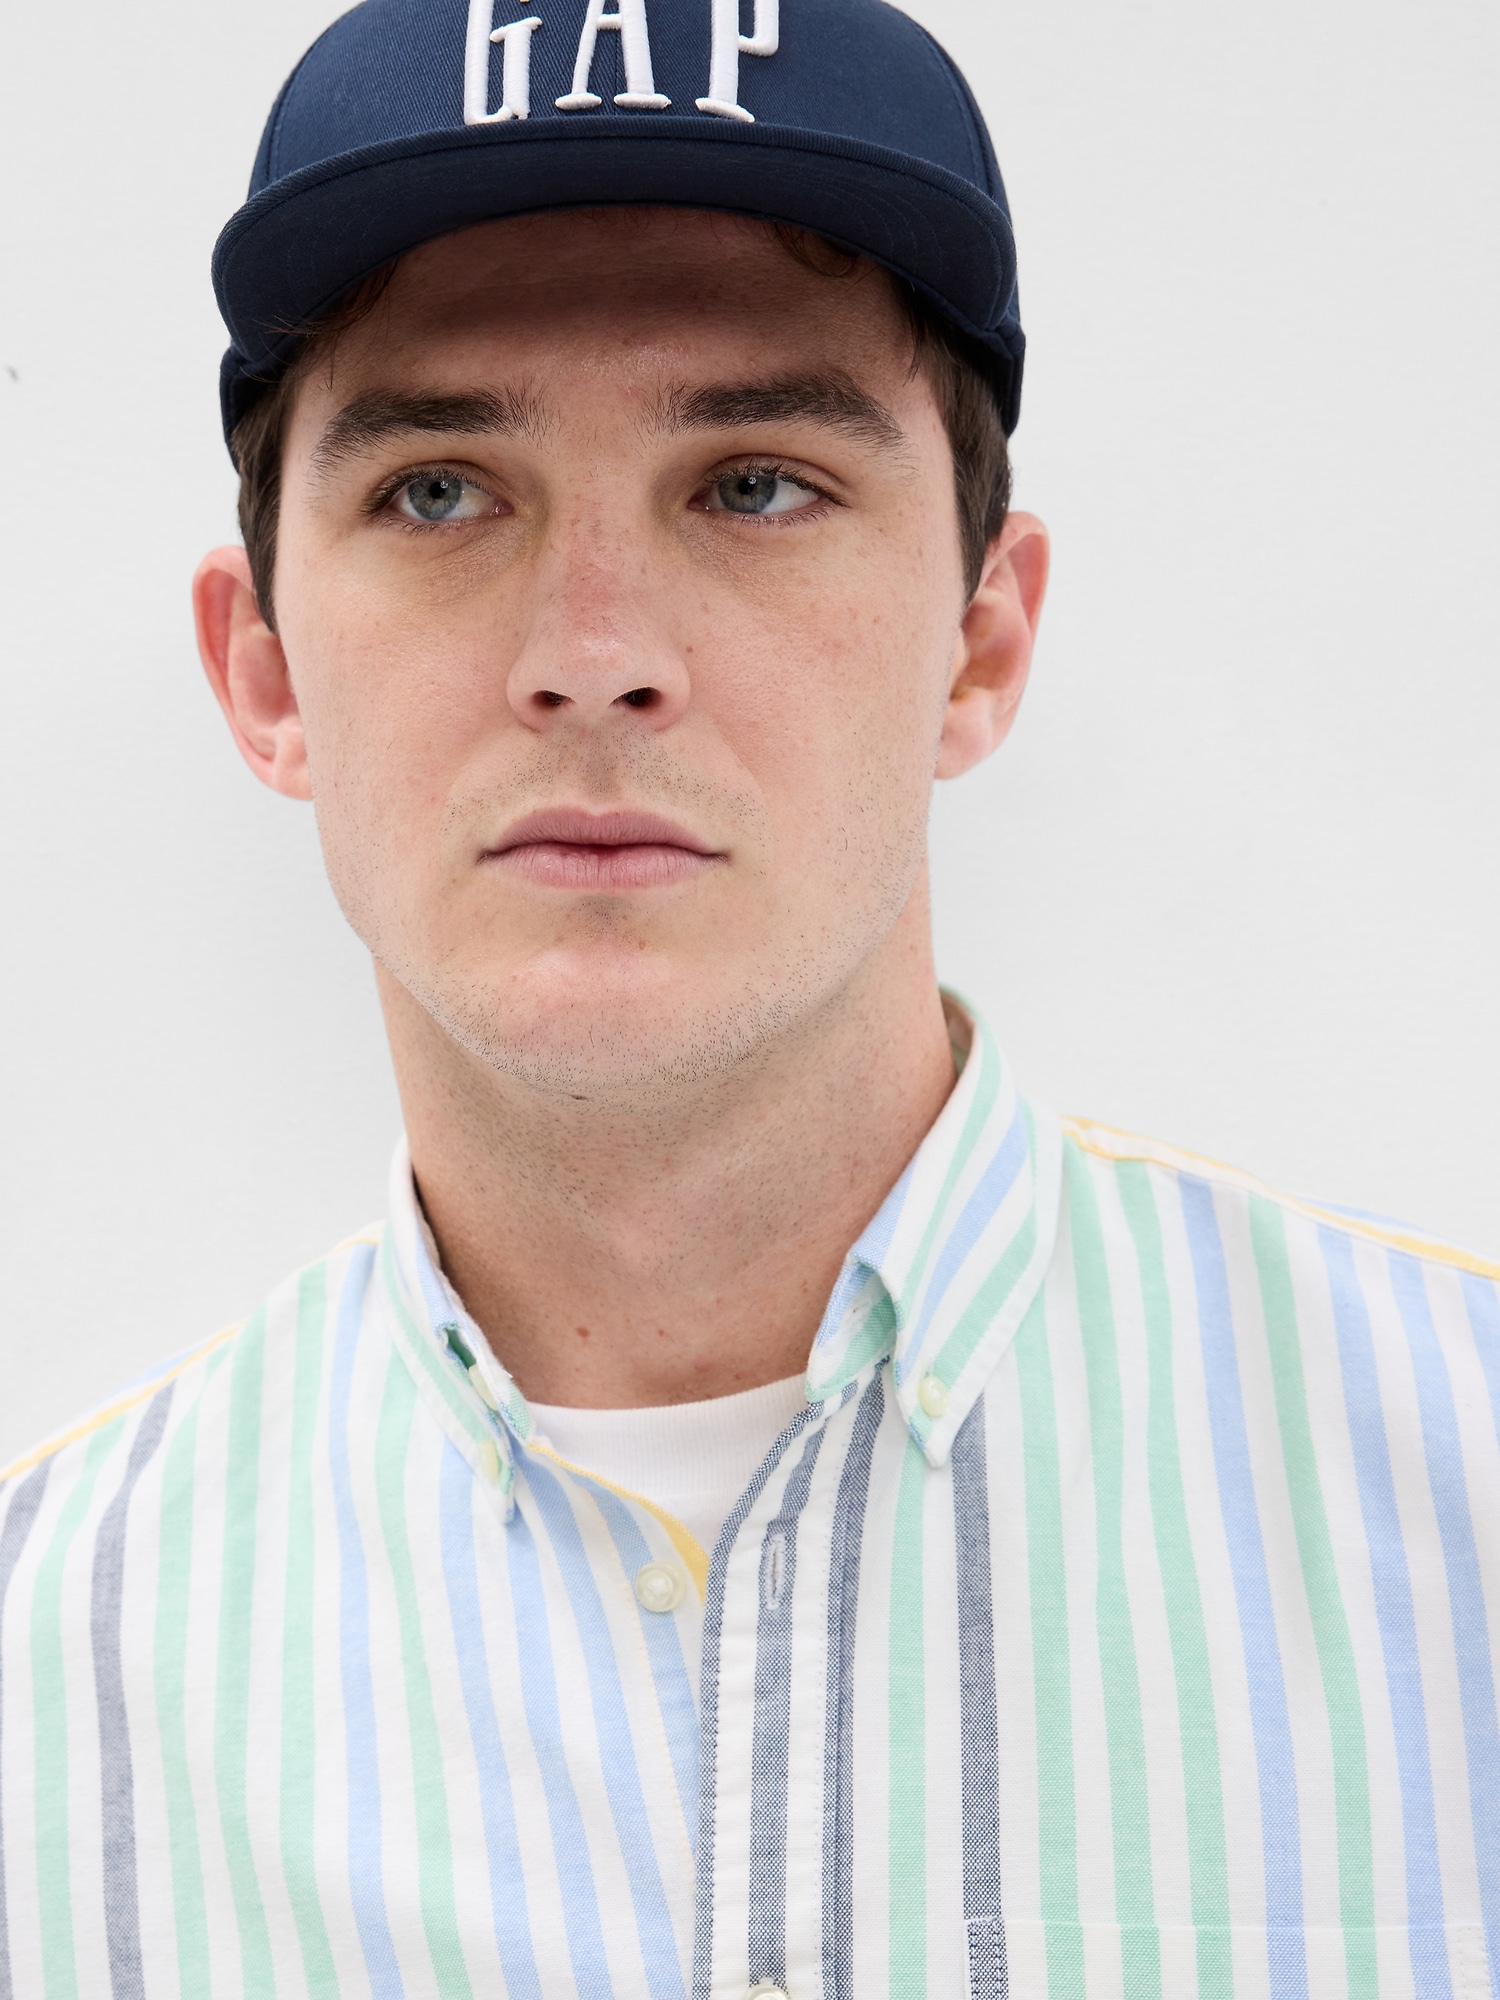 Classic Oxford Shirt in Standard Fit with In-Conversion Cotton | Gap